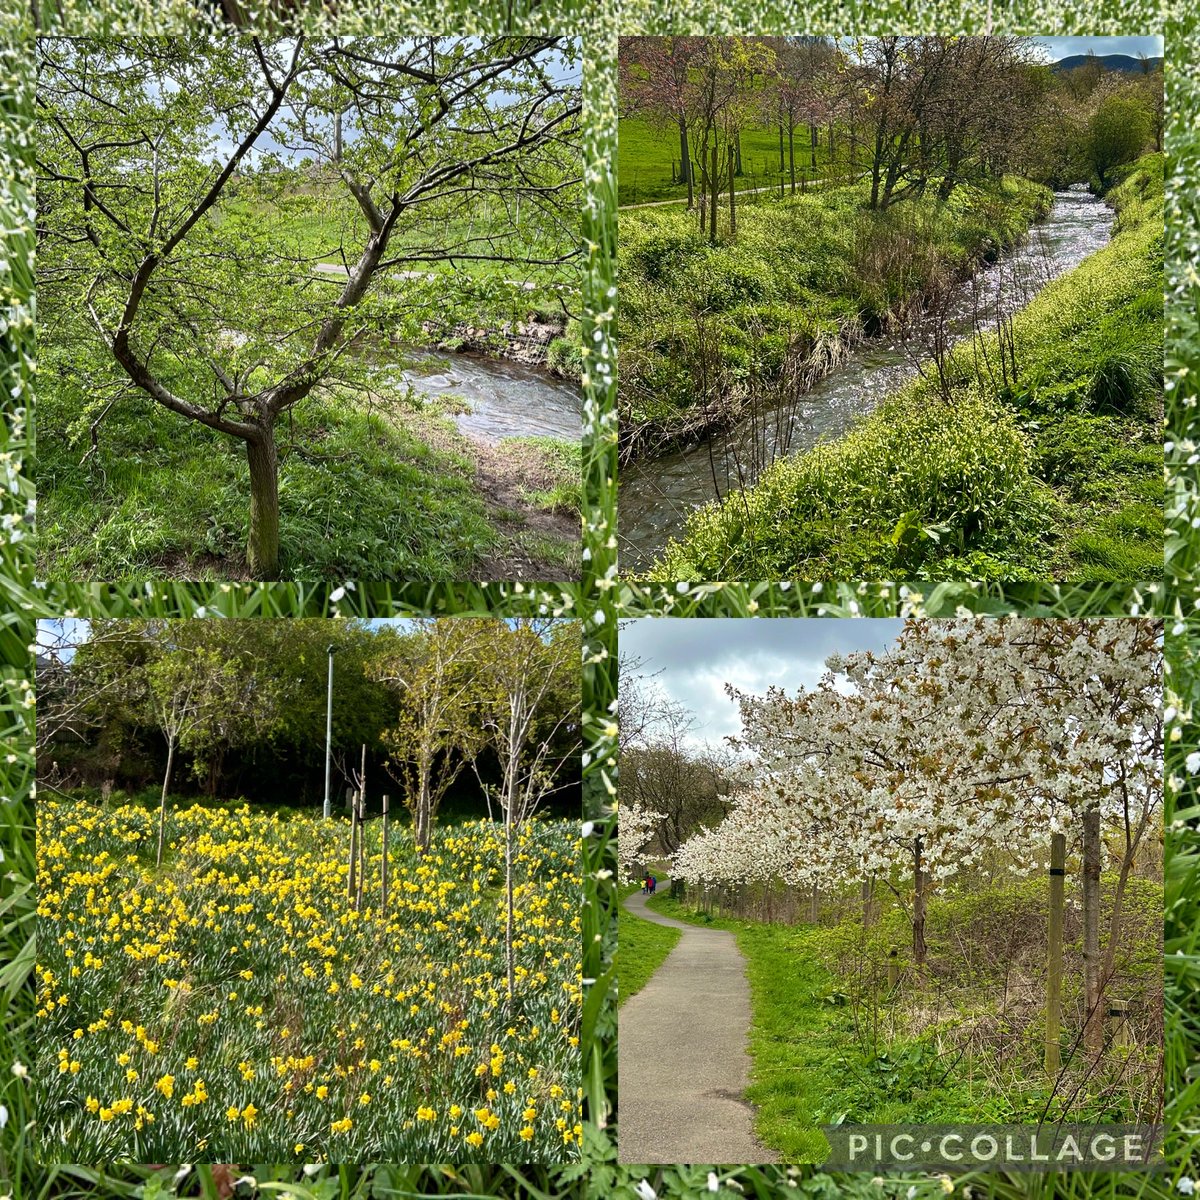 On my walk this morning in Braidburn Valley Park, cold, windy but dry. Plum tree blossom and daffodils aplenty. #MondayMotivation #Nature